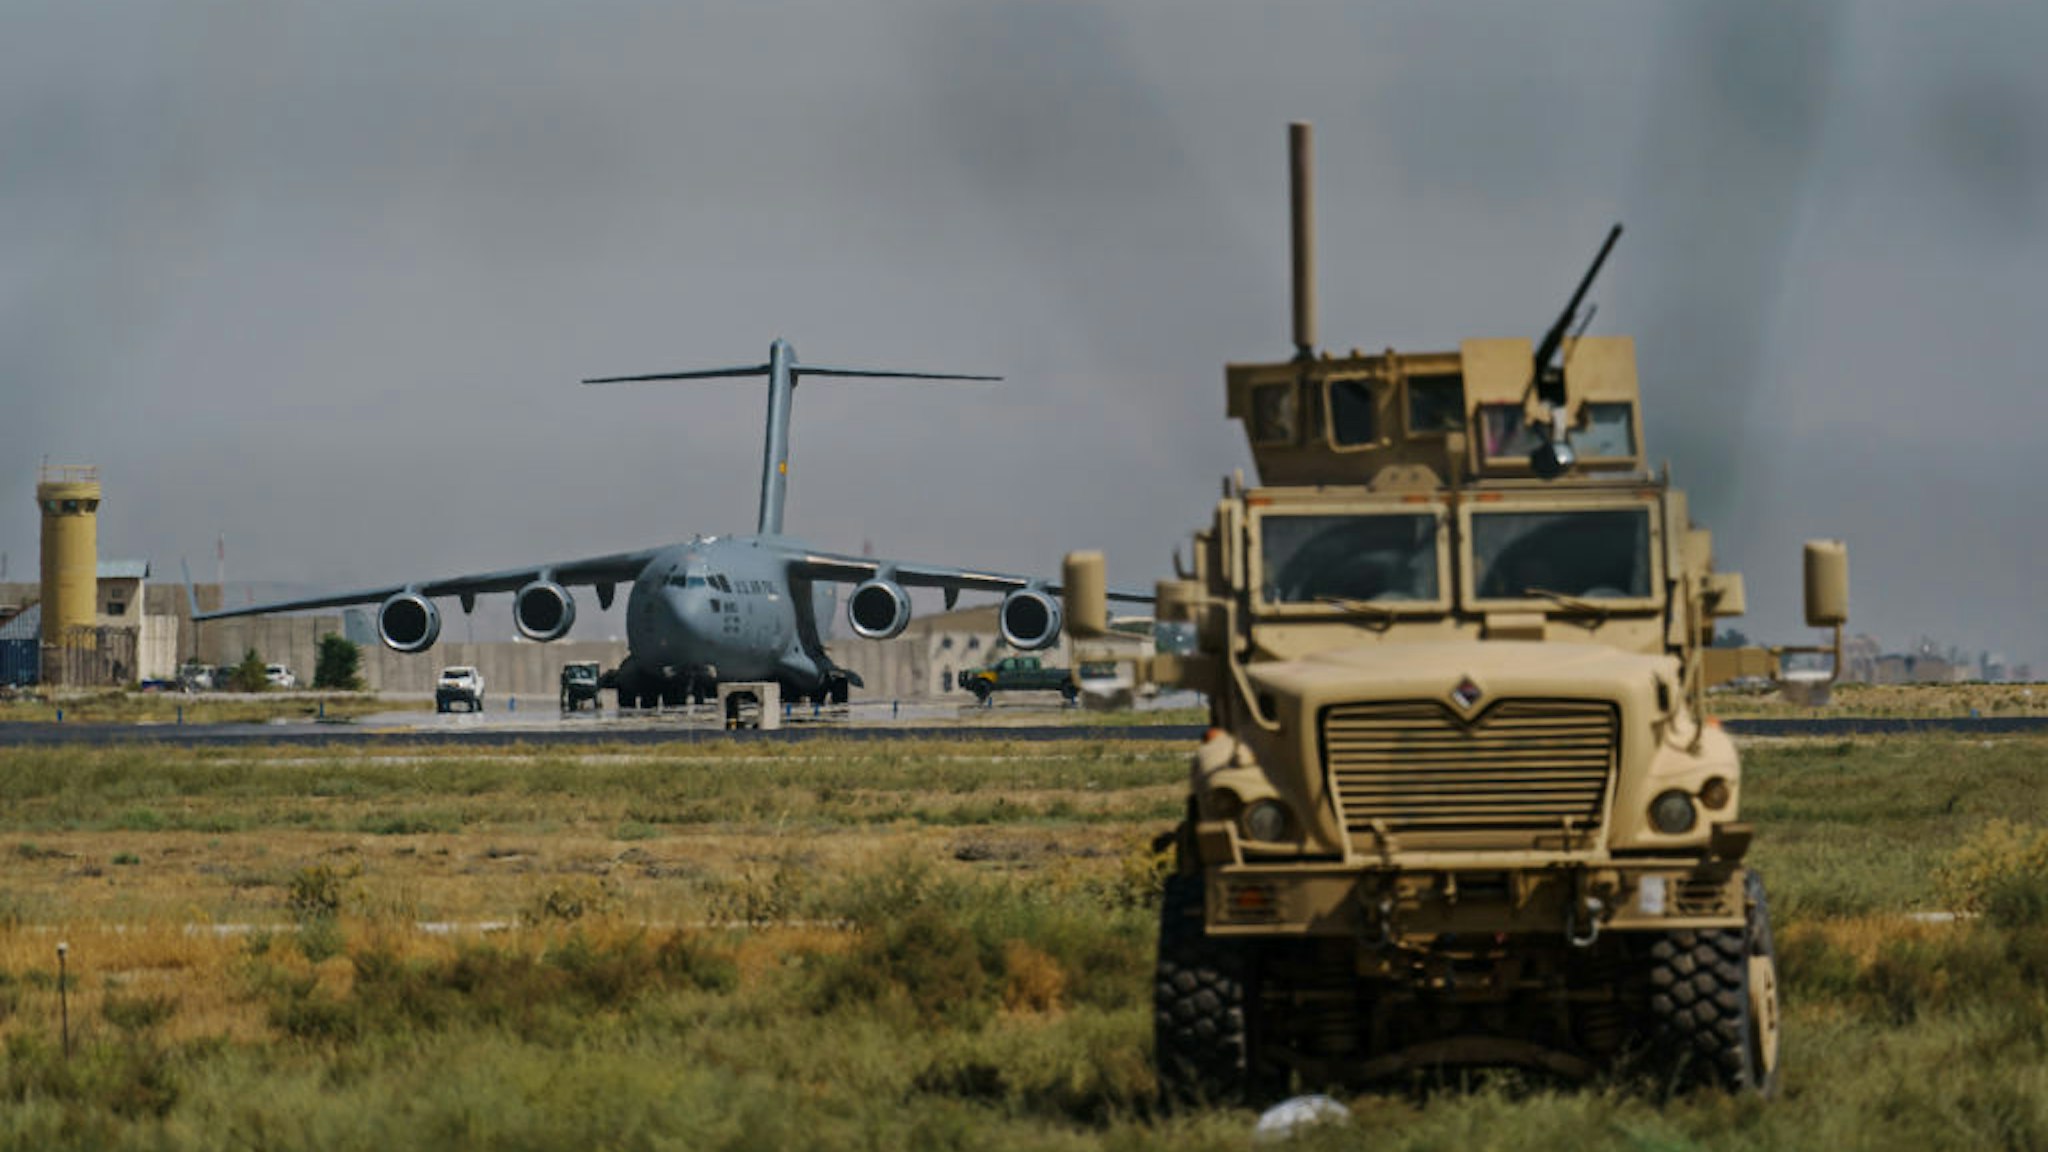 KABUL, AFGHANISTAN -- AUGUST 29, 2021: A view of the C-17 Globemaster prepares to take off in the Hamid Karzai International Airport in Kabul, Afghanistan, Sunday, Aug. 29, 2021. (MARCUS YAM / LOS ANGELES TIMES)